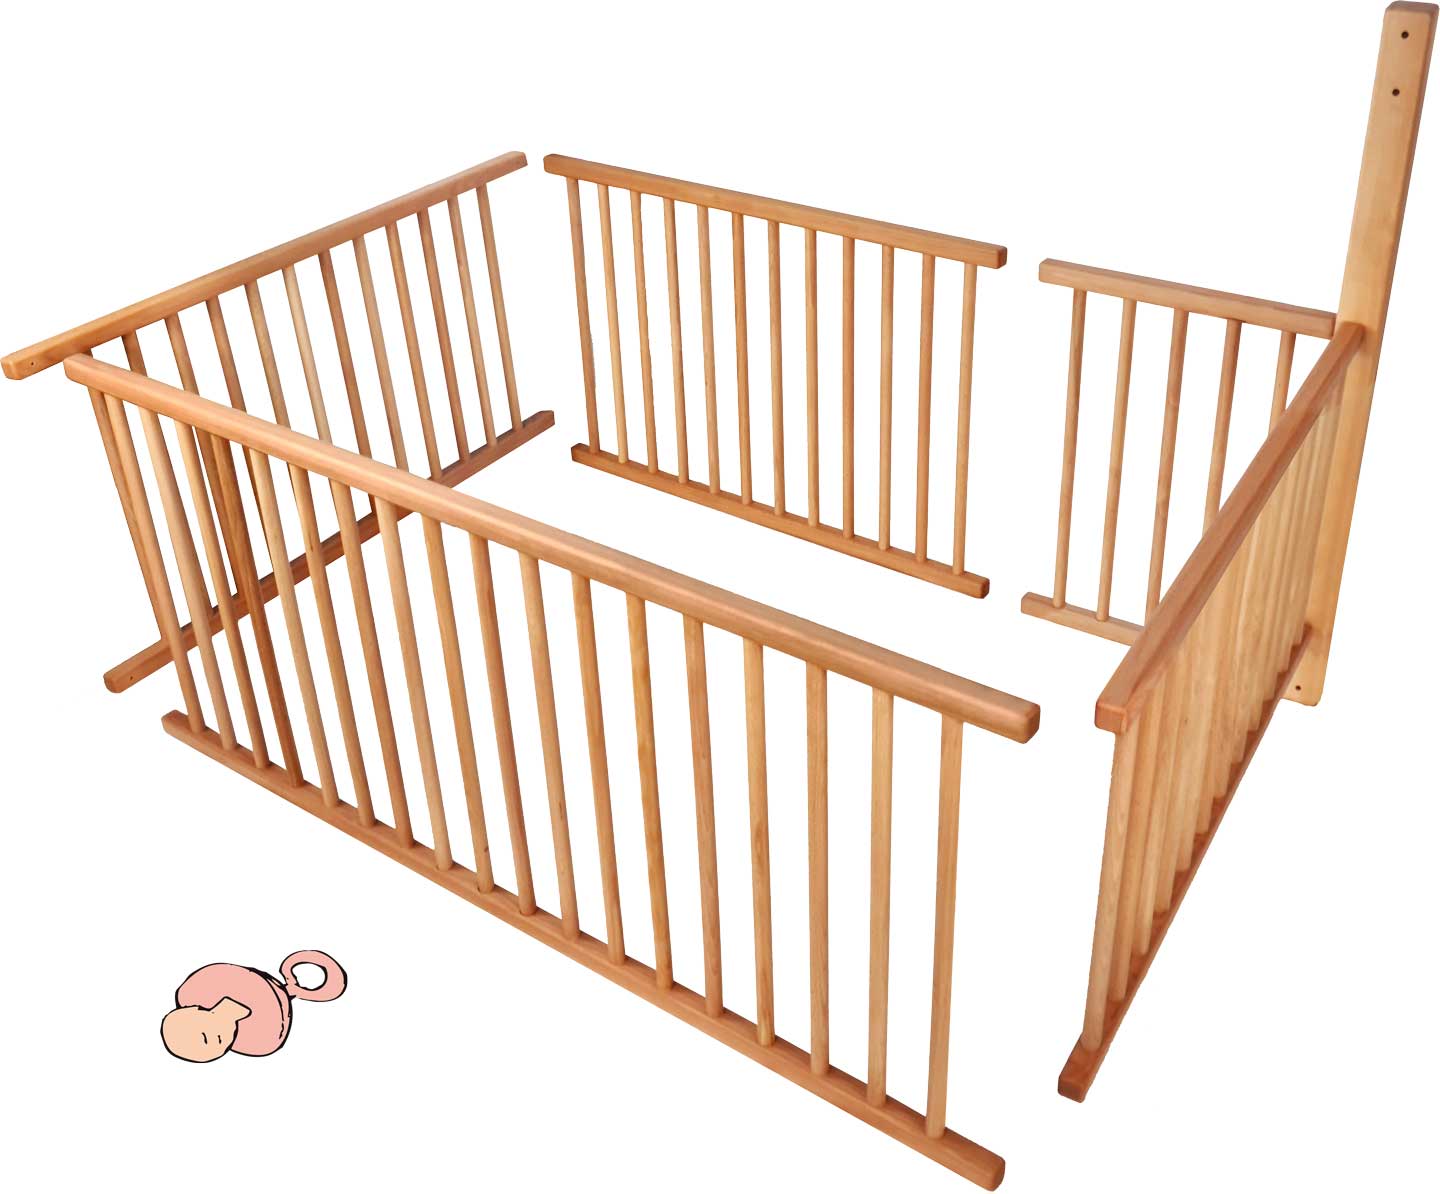 Baby Gate Set for Bunk Bed with default legs (196 cm) and ladder position A for ¾ of the sleeping area including the required extra beam**